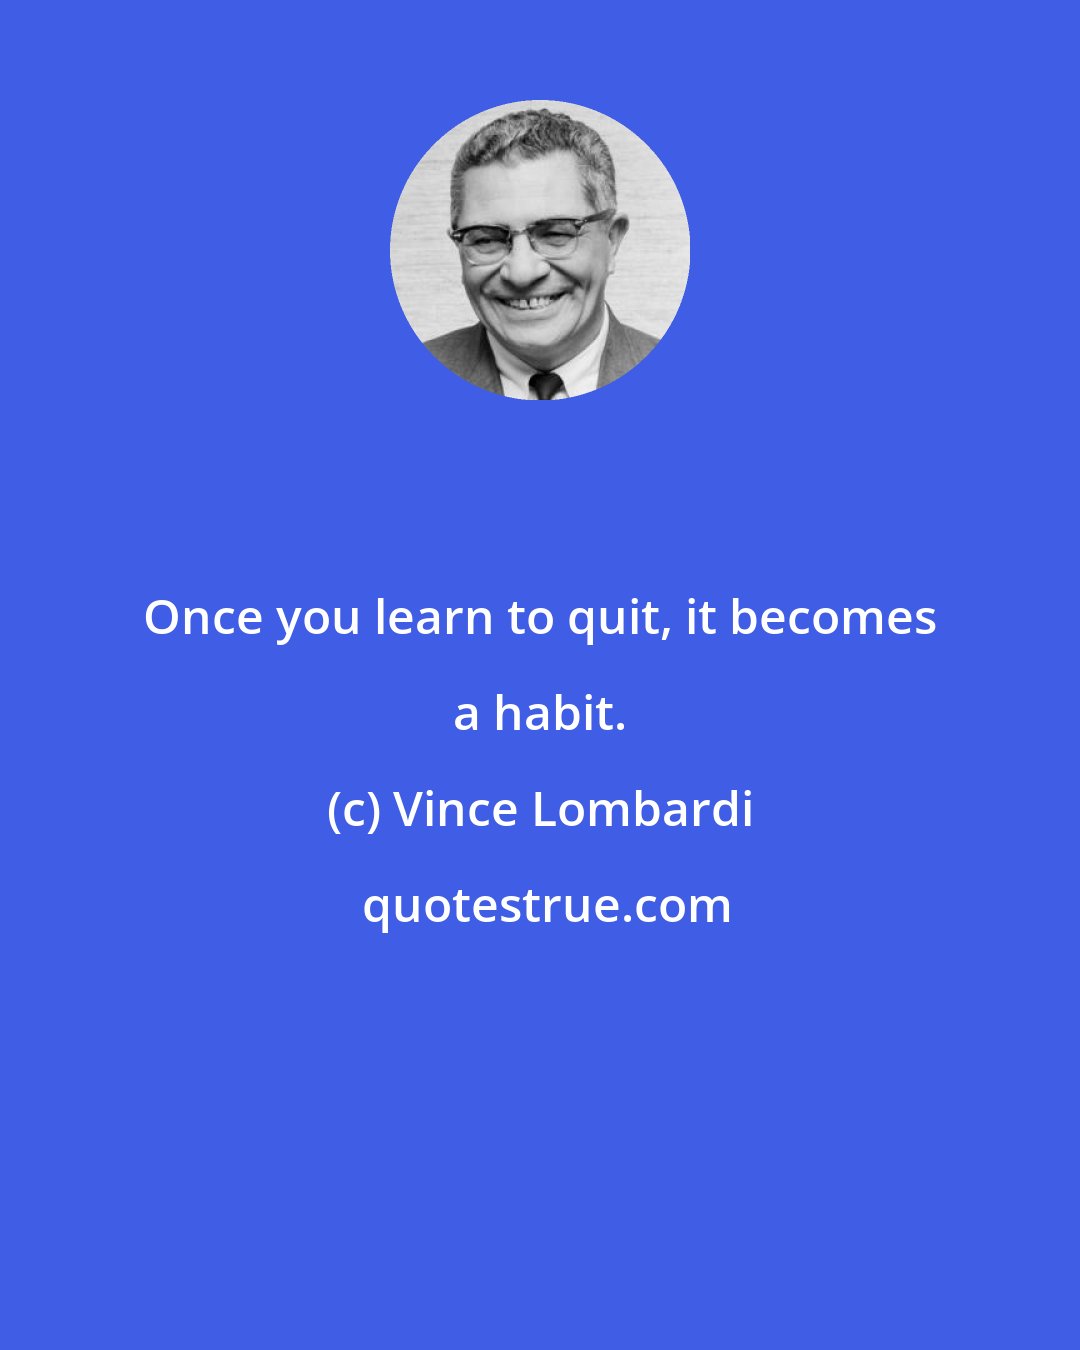 Vince Lombardi: Once you learn to quit, it becomes a habit.